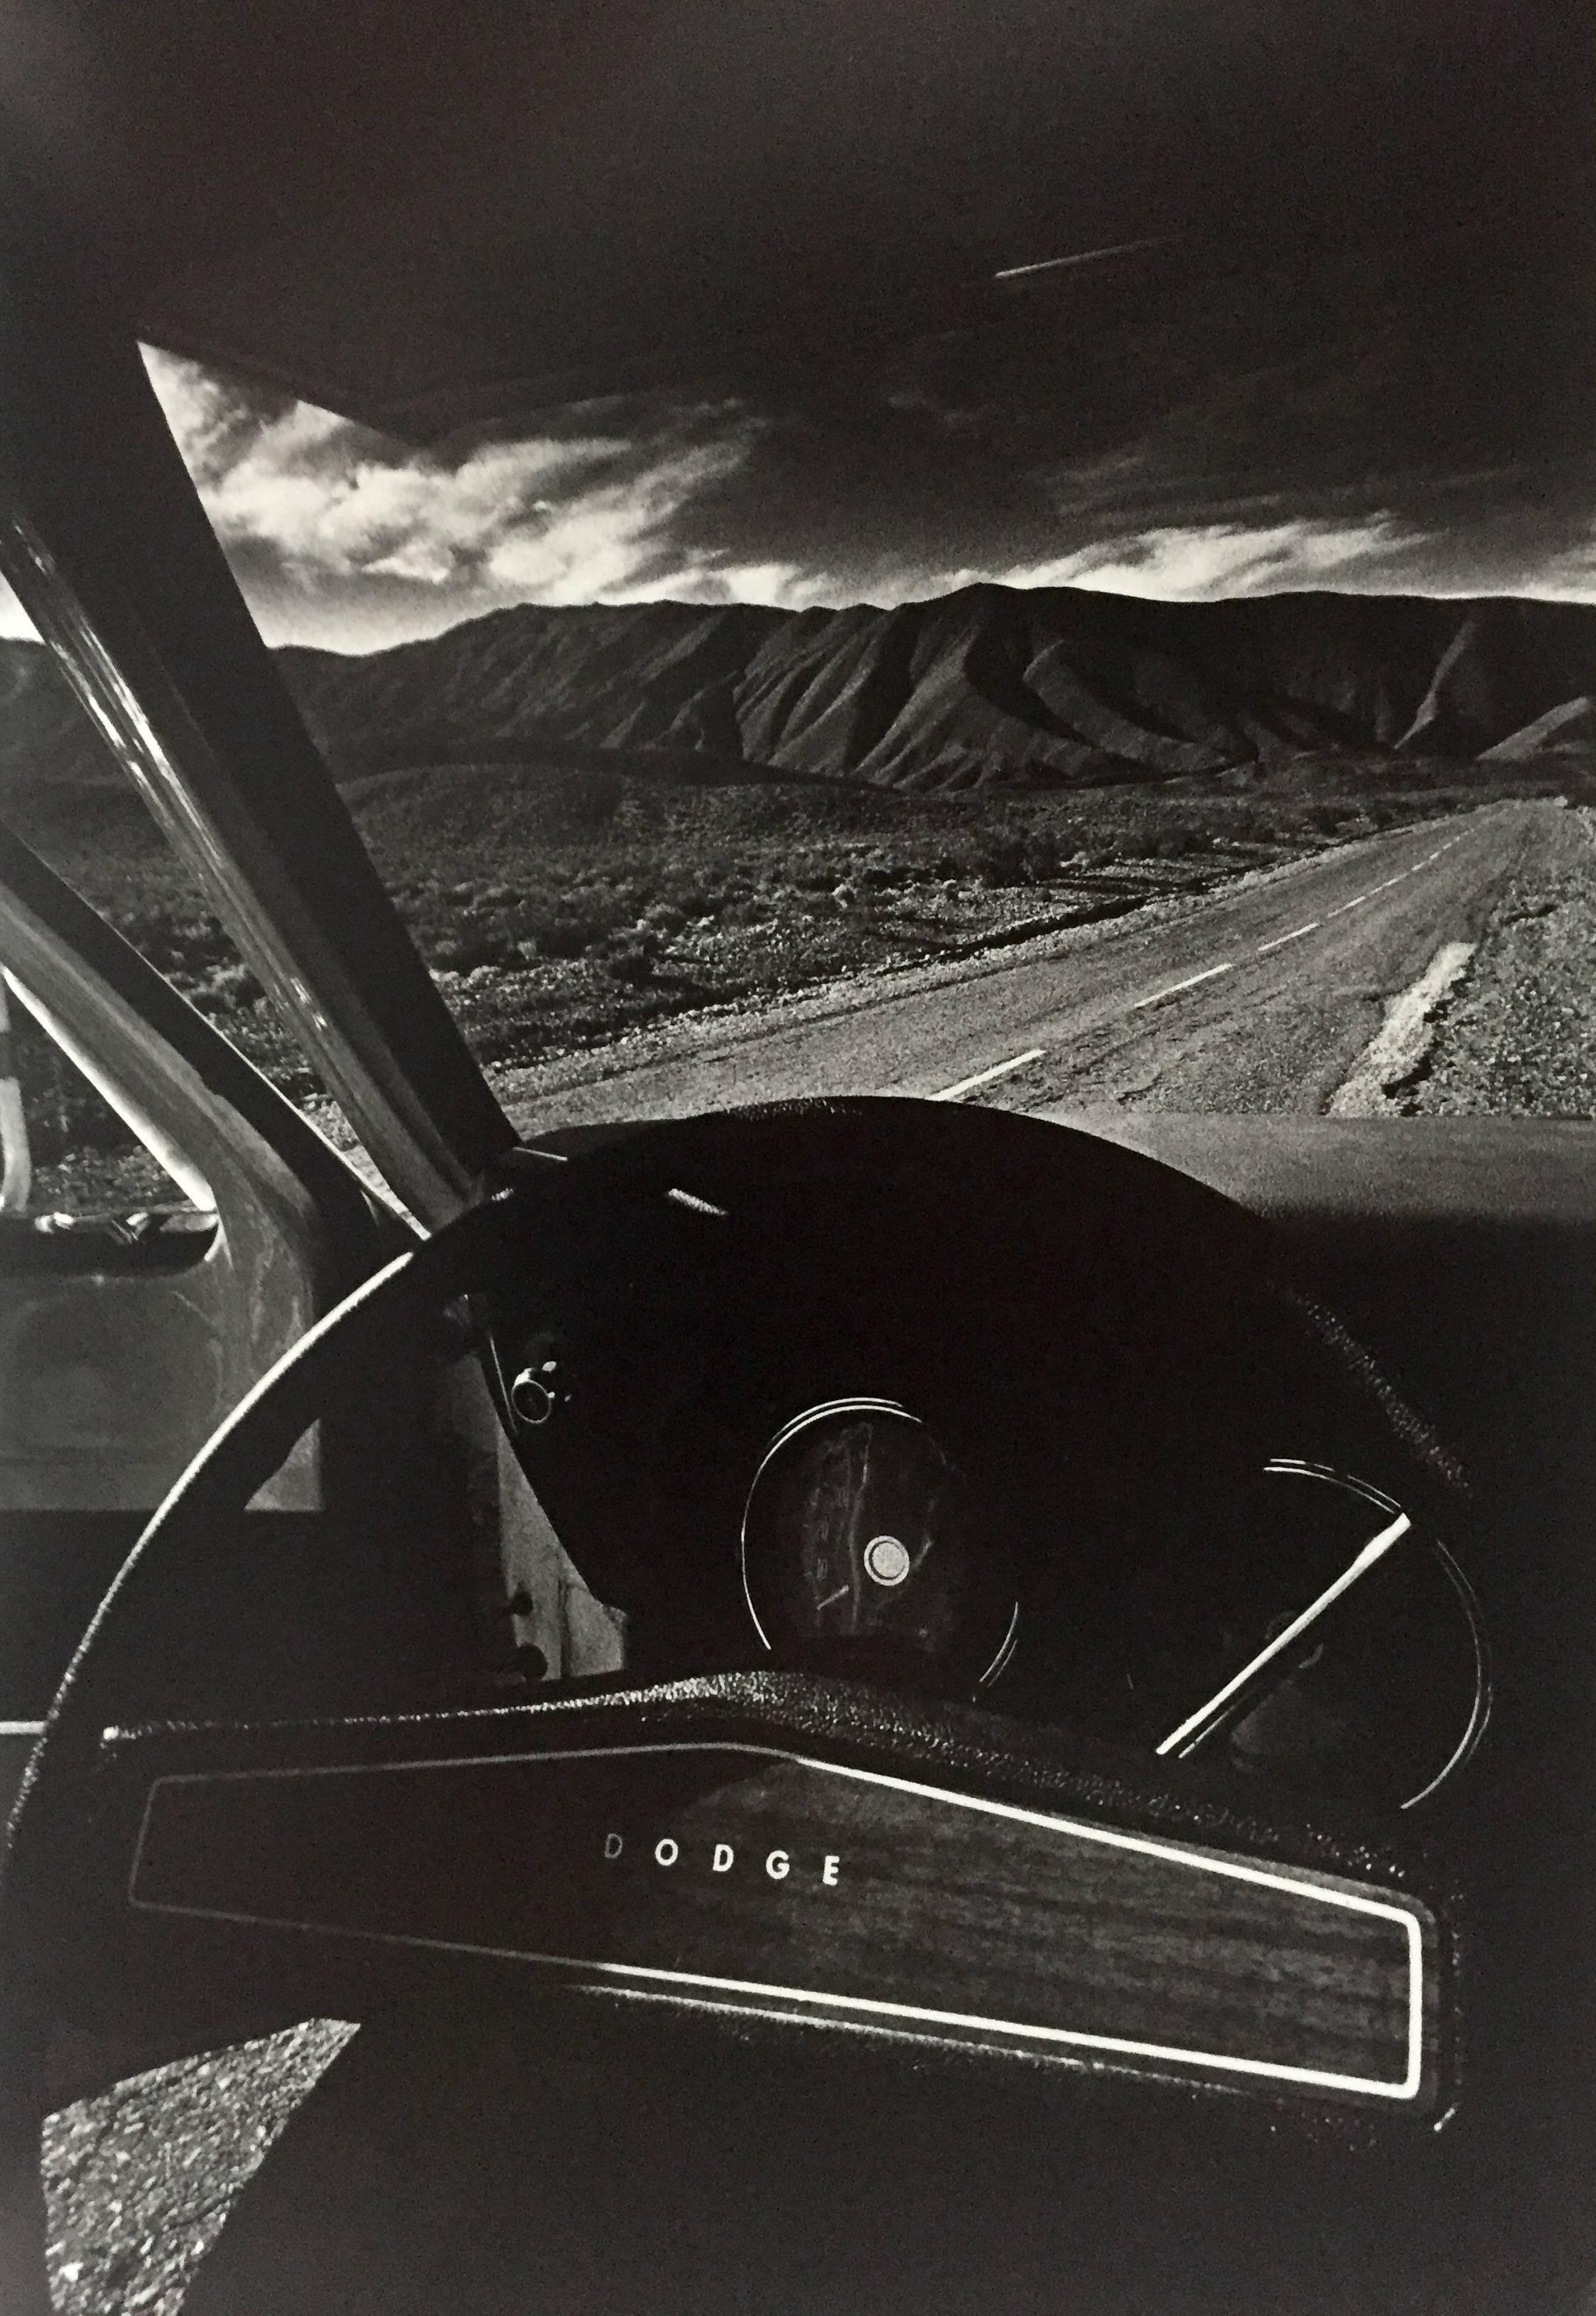 First Edition, published by Evergreen Press / Taschen, Germany, 1996.

In this unique and substantial monograph, Jeanloup Sieff retraces in word and image the course of forty years of photographs, encounters and memories. Divided into four chapters,